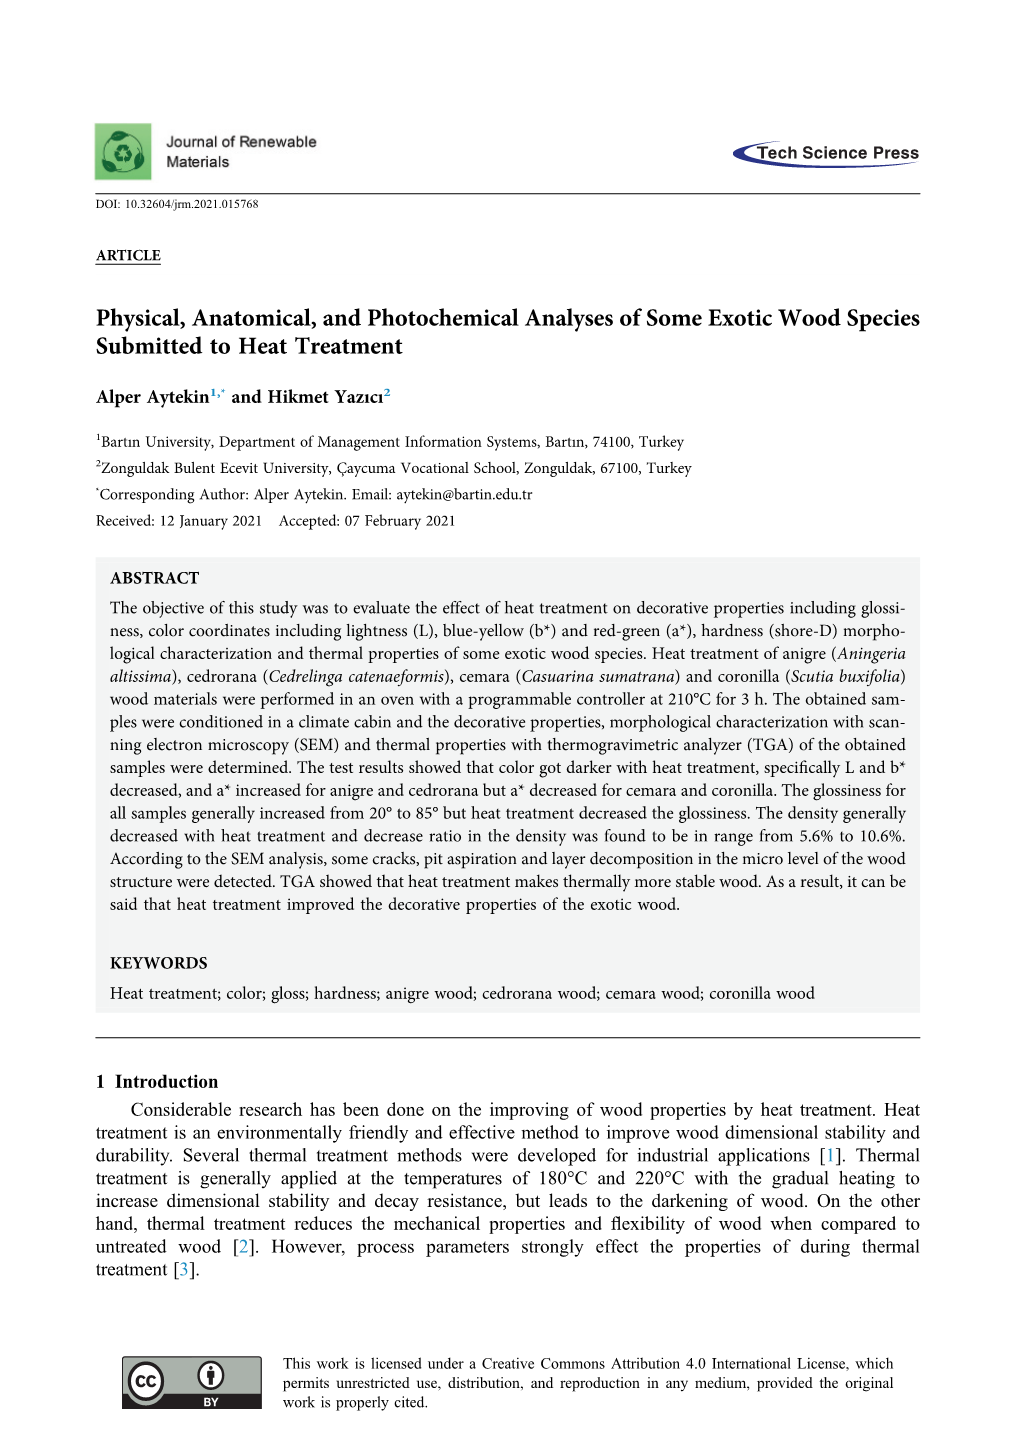 Physical, Anatomical, and Photochemical Analyses of Some Exotic Wood Species Submitted to Heat Treatment